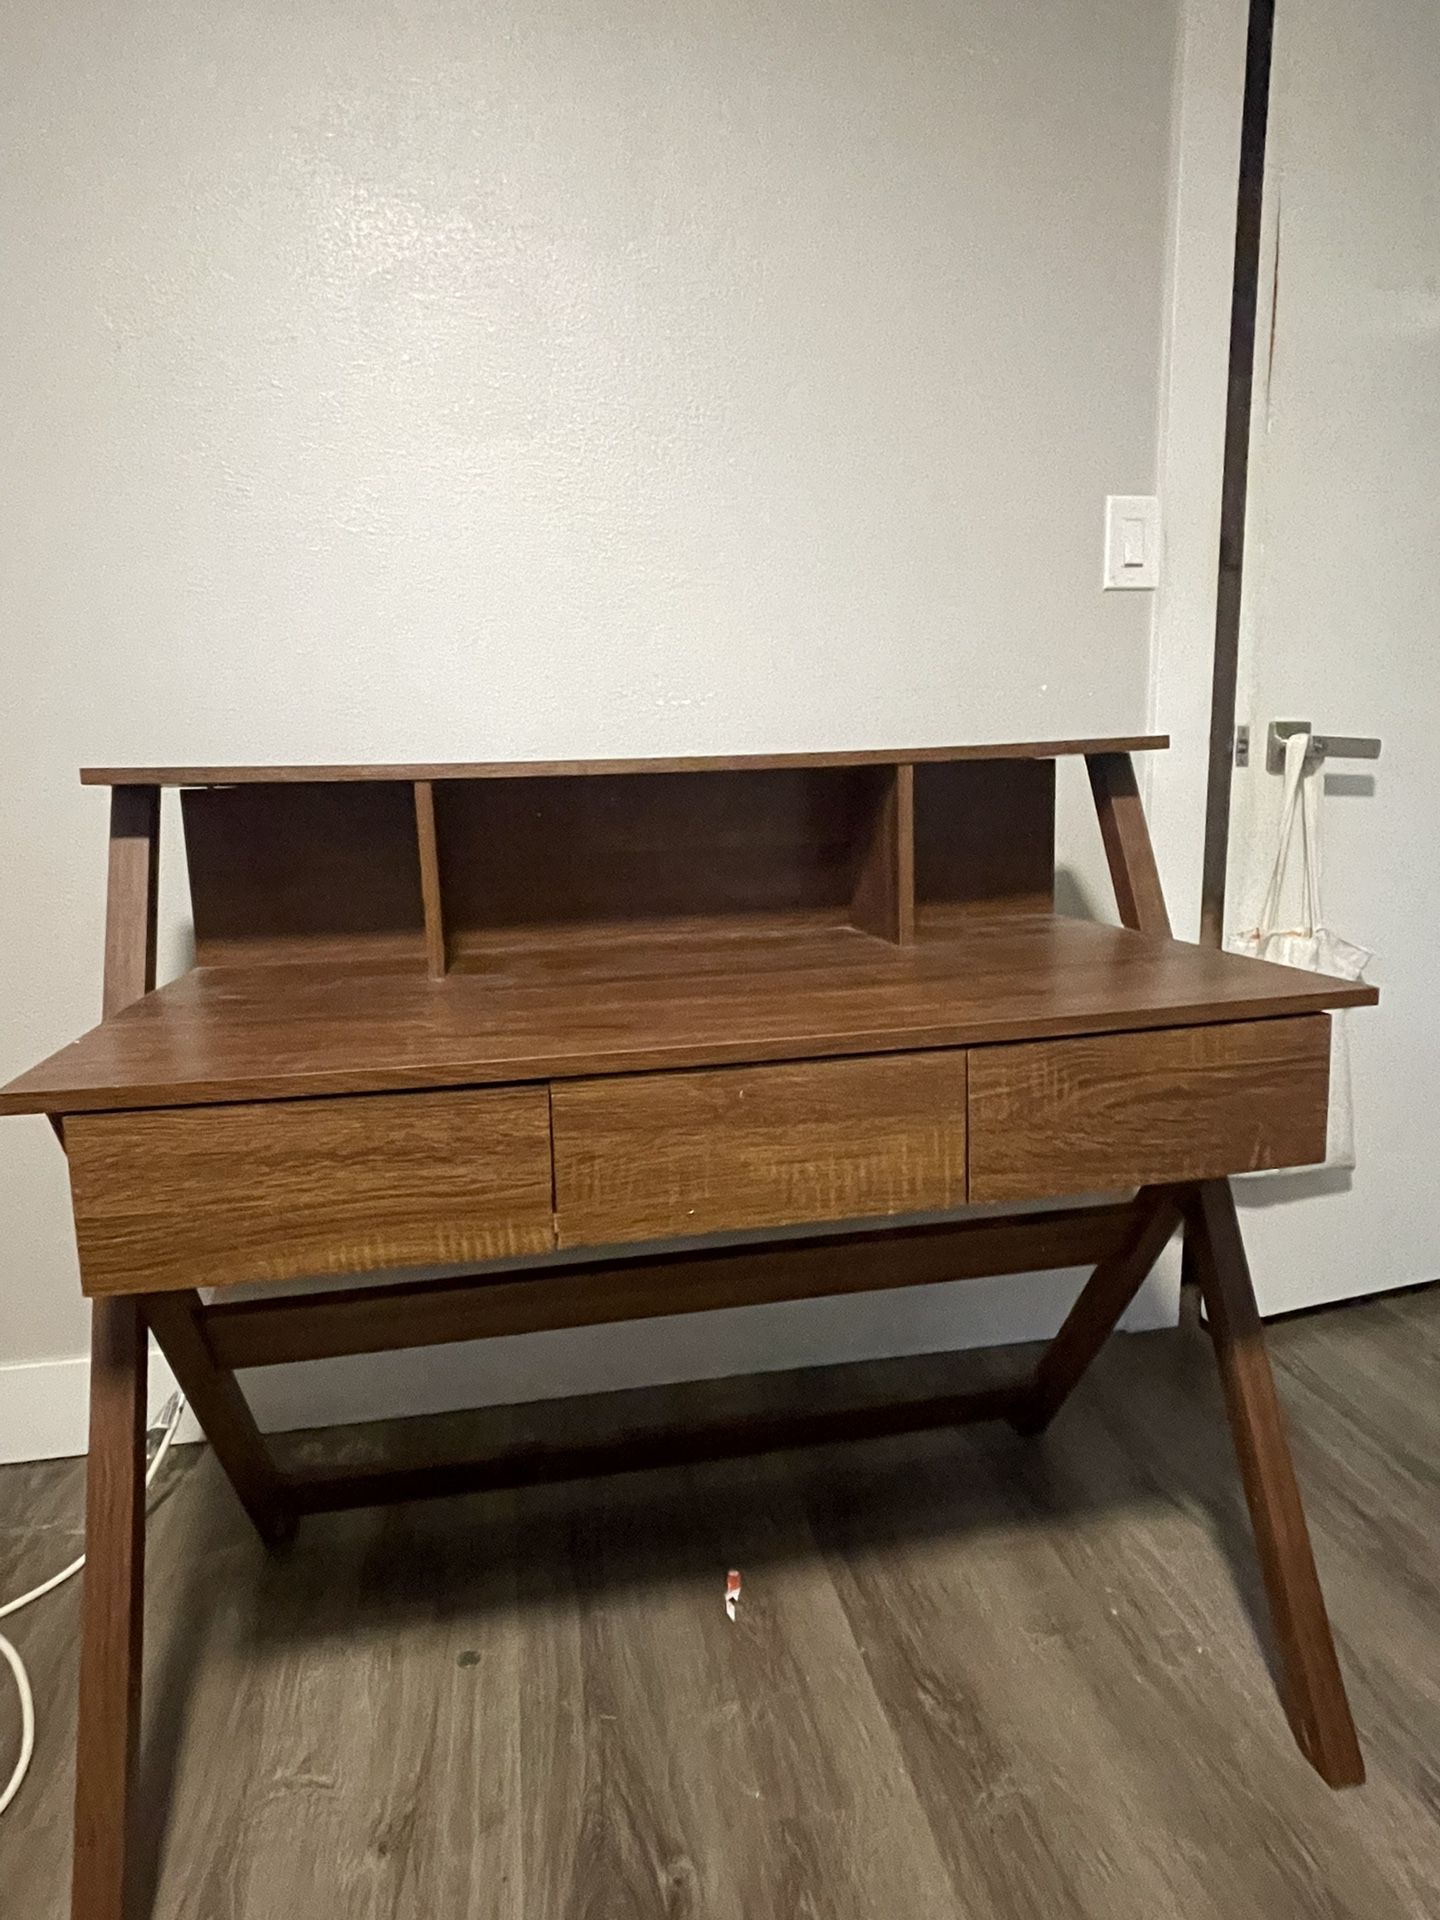 Small Desk With Shelf Space And Drawers